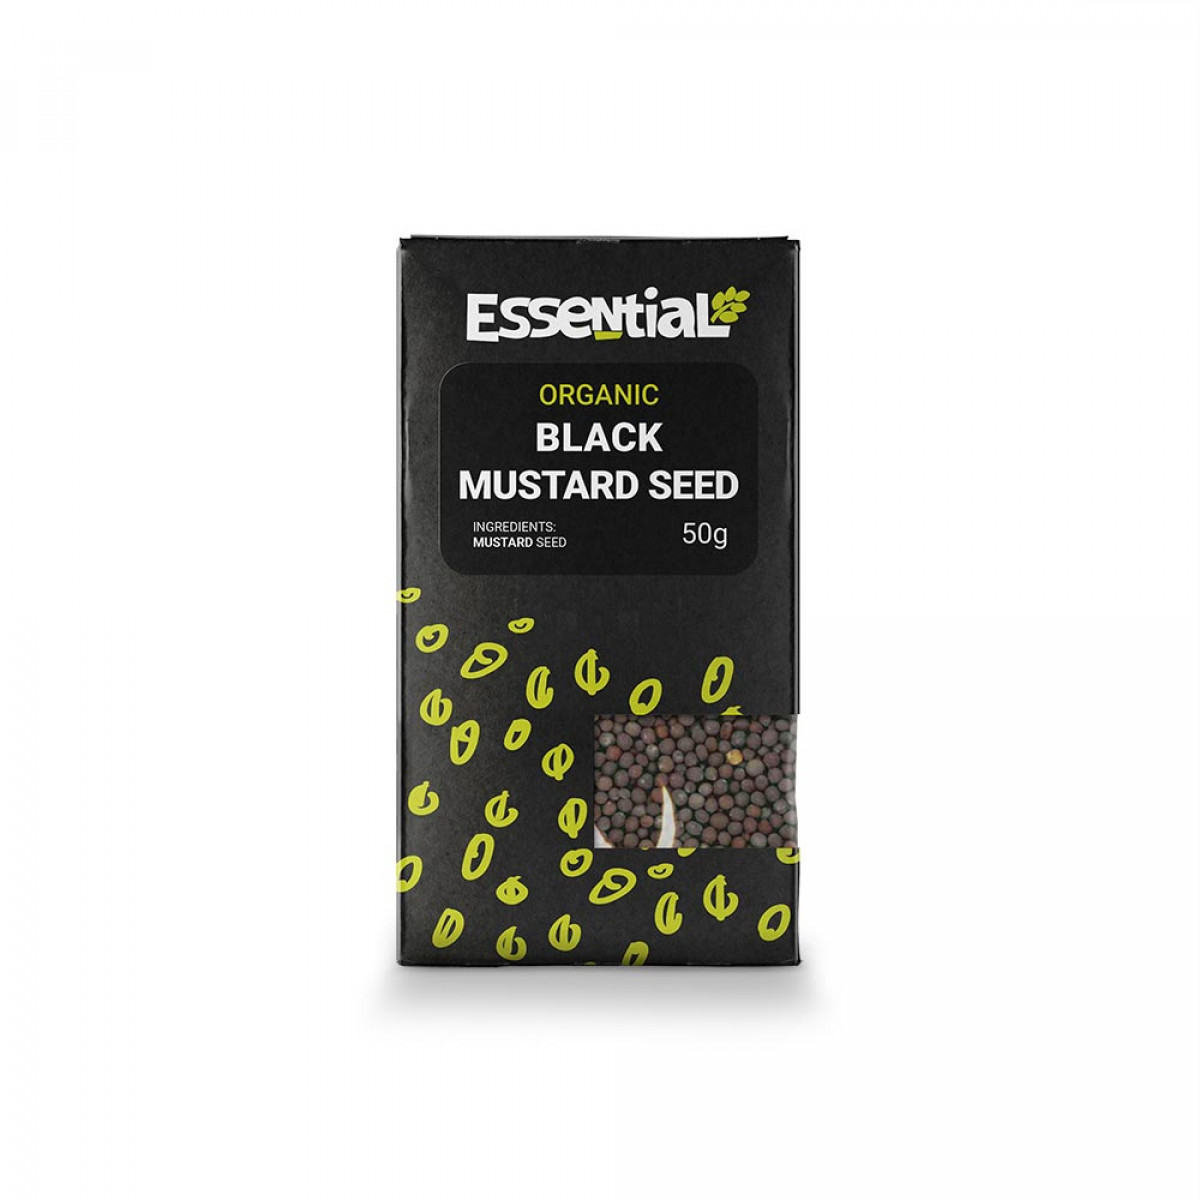 Product picture for Mustard Seed Black